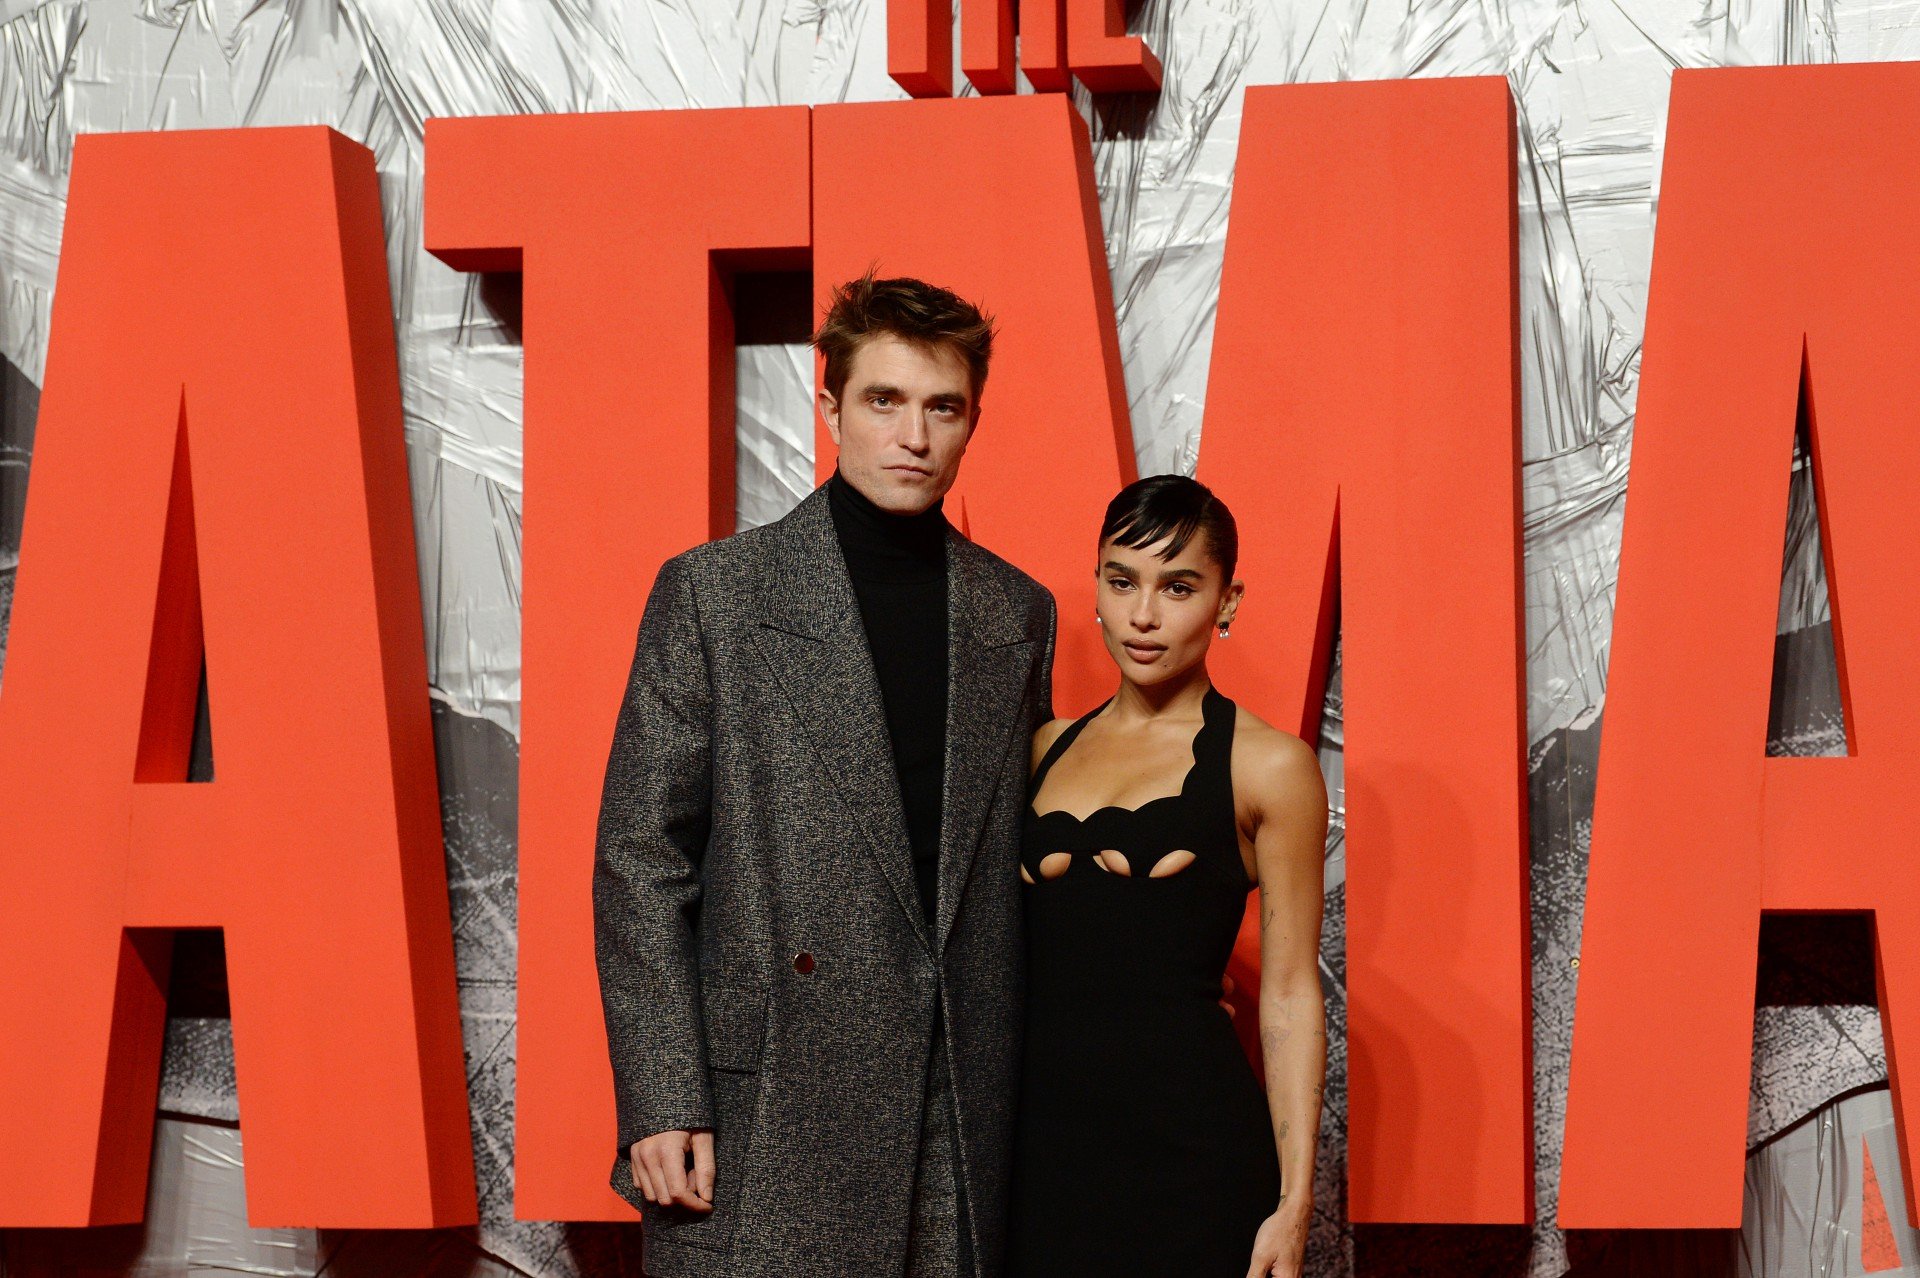 Robert Pattison and Zoe Kravitz pose in front of The Batman sign at the movie premier.